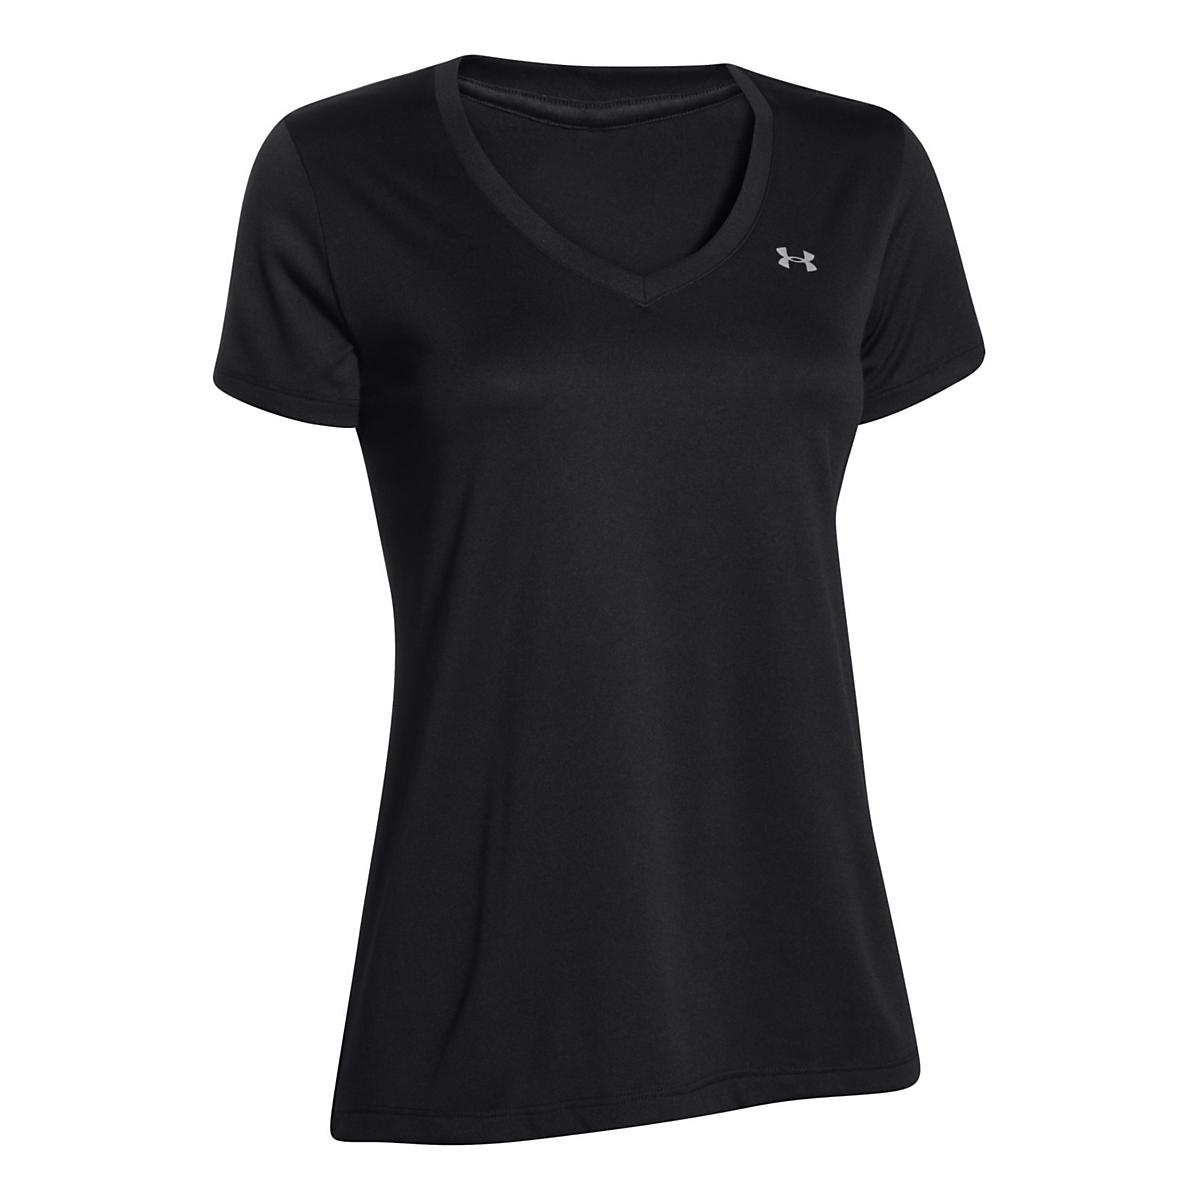 Womens R-Gear Fast and Fab Short Sleeve Technical Top at Road Runner Sports